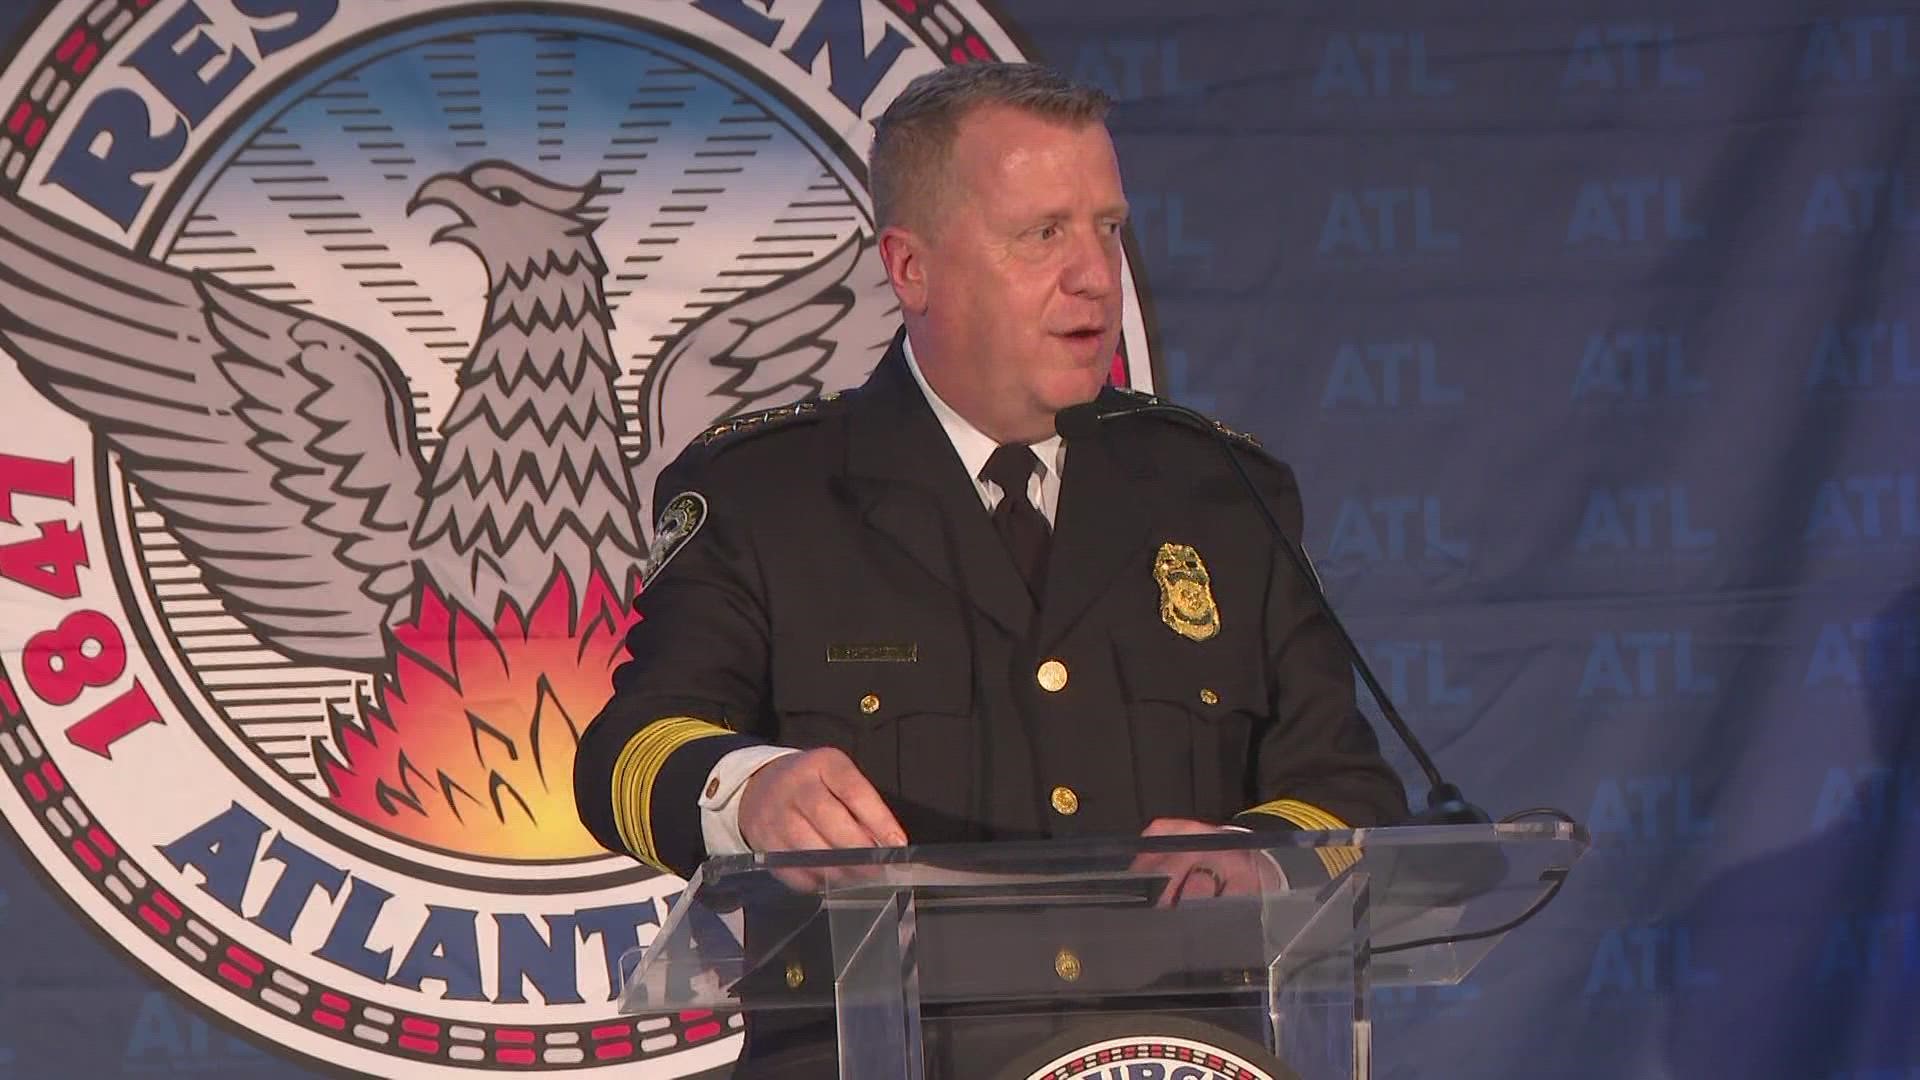 A special swearing-in ceremony is being held for Atlanta Police Chief Darin Schierbaum Wednesday evening.